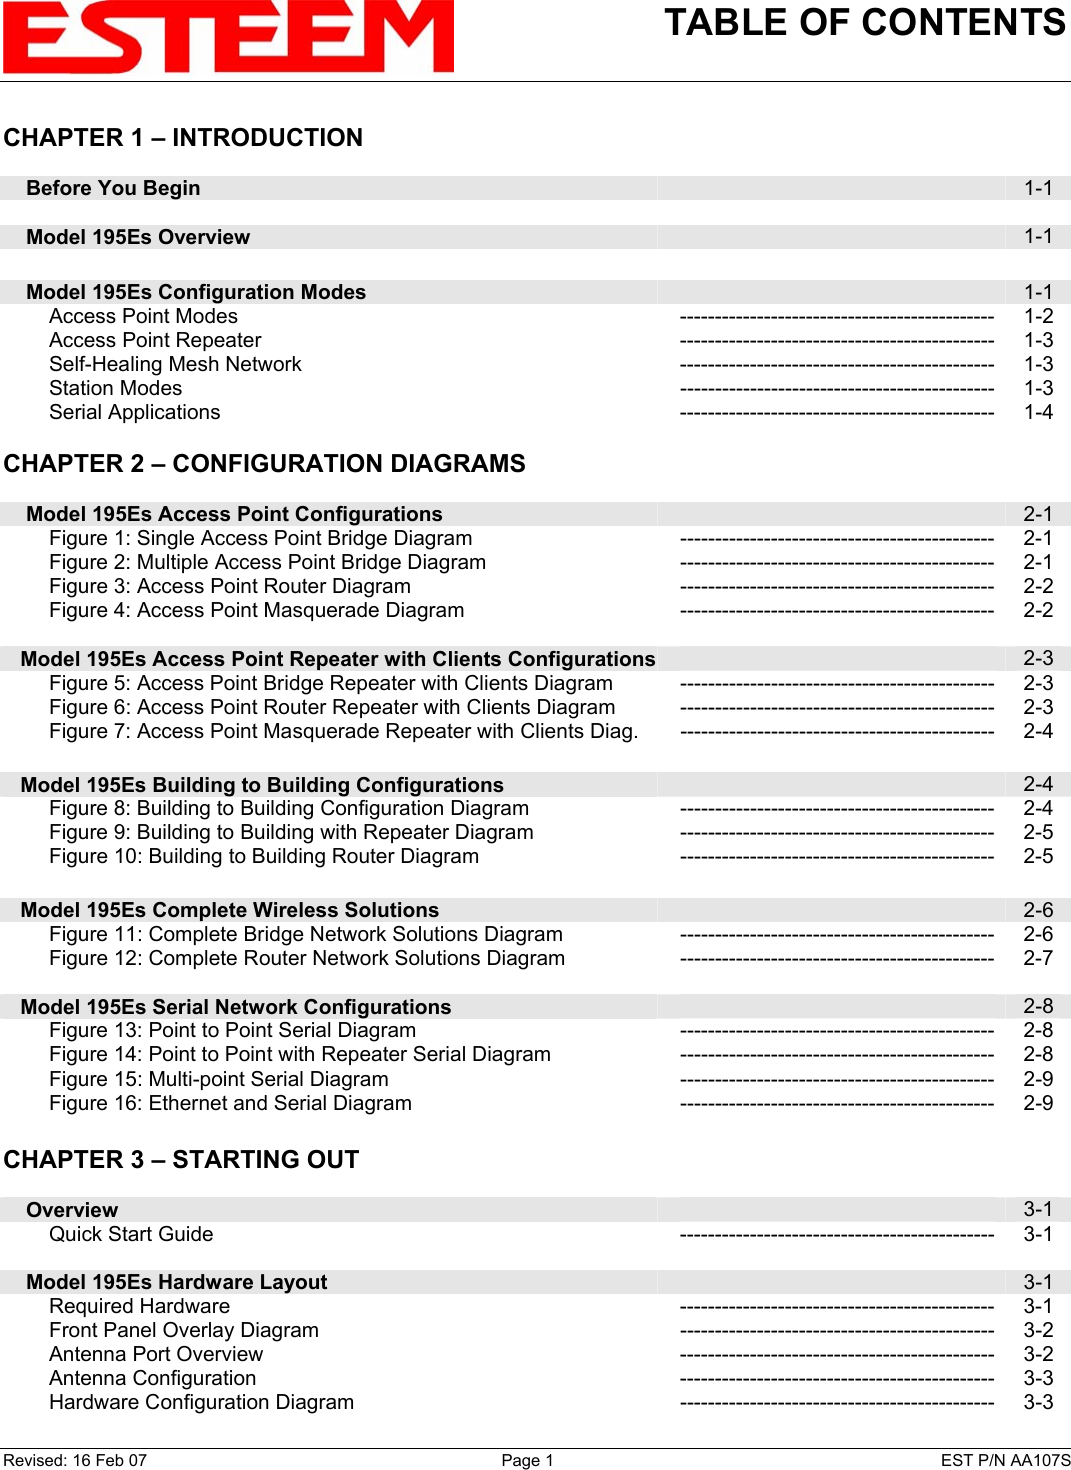 TABLE OF CONTENTS    CHAPTER 1 – INTRODUCTION      Before You Begin   1-1      Model 195Es Overview   1-1        Model 195Es Configuration Modes   1-1         Access Point Modes --------------------------------------------- 1-2         Access Point Repeater --------------------------------------------- 1-3         Self-Healing Mesh Network --------------------------------------------- 1-3         Station Modes  --------------------------------------------- 1-3         Serial Applications --------------------------------------------- 1-4    CHAPTER 2 – CONFIGURATION DIAGRAMS          Model 195Es Access Point Configurations   2-1         Figure 1: Single Access Point Bridge Diagram  --------------------------------------------- 2-1         Figure 2: Multiple Access Point Bridge Diagram  --------------------------------------------- 2-1         Figure 3: Access Point Router Diagram --------------------------------------------- 2-2         Figure 4: Access Point Masquerade Diagram --------------------------------------------- 2-2       Model 195Es Access Point Repeater with Clients Configurations  2-3         Figure 5: Access Point Bridge Repeater with Clients Diagram  --------------------------------------------- 2-3         Figure 6: Access Point Router Repeater with Clients Diagram  --------------------------------------------- 2-3         Figure 7: Access Point Masquerade Repeater with Clients Diag.  --------------------------------------------- 2-4       Model 195Es Building to Building Configurations   2-4         Figure 8: Building to Building Configuration Diagram  --------------------------------------------- 2-4         Figure 9: Building to Building with Repeater Diagram  --------------------------------------------- 2-5         Figure 10: Building to Building Router Diagram  --------------------------------------------- 2-5       Model 195Es Complete Wireless Solutions   2-6         Figure 11: Complete Bridge Network Solutions Diagram  --------------------------------------------- 2-6         Figure 12: Complete Router Network Solutions Diagram  --------------------------------------------- 2-7       Model 195Es Serial Network Configurations   2-8         Figure 13: Point to Point Serial Diagram  --------------------------------------------- 2-8         Figure 14: Point to Point with Repeater Serial Diagram  --------------------------------------------- 2-8         Figure 15: Multi-point Serial Diagram --------------------------------------------- 2-9         Figure 16: Ethernet and Serial Diagram --------------------------------------------- 2-9    CHAPTER 3 – STARTING OUT          Overview   3-1         Quick Start Guide --------------------------------------------- 3-1        Model 195Es Hardware Layout   3-1         Required Hardware  --------------------------------------------- 3-1         Front Panel Overlay Diagram --------------------------------------------- 3-2         Antenna Port Overview --------------------------------------------- 3-2         Antenna Configuration --------------------------------------------- 3-3         Hardware Configuration Diagram --------------------------------------------- 3-3 Revised: 16 Feb 07  Page 1  EST P/N AA107S 